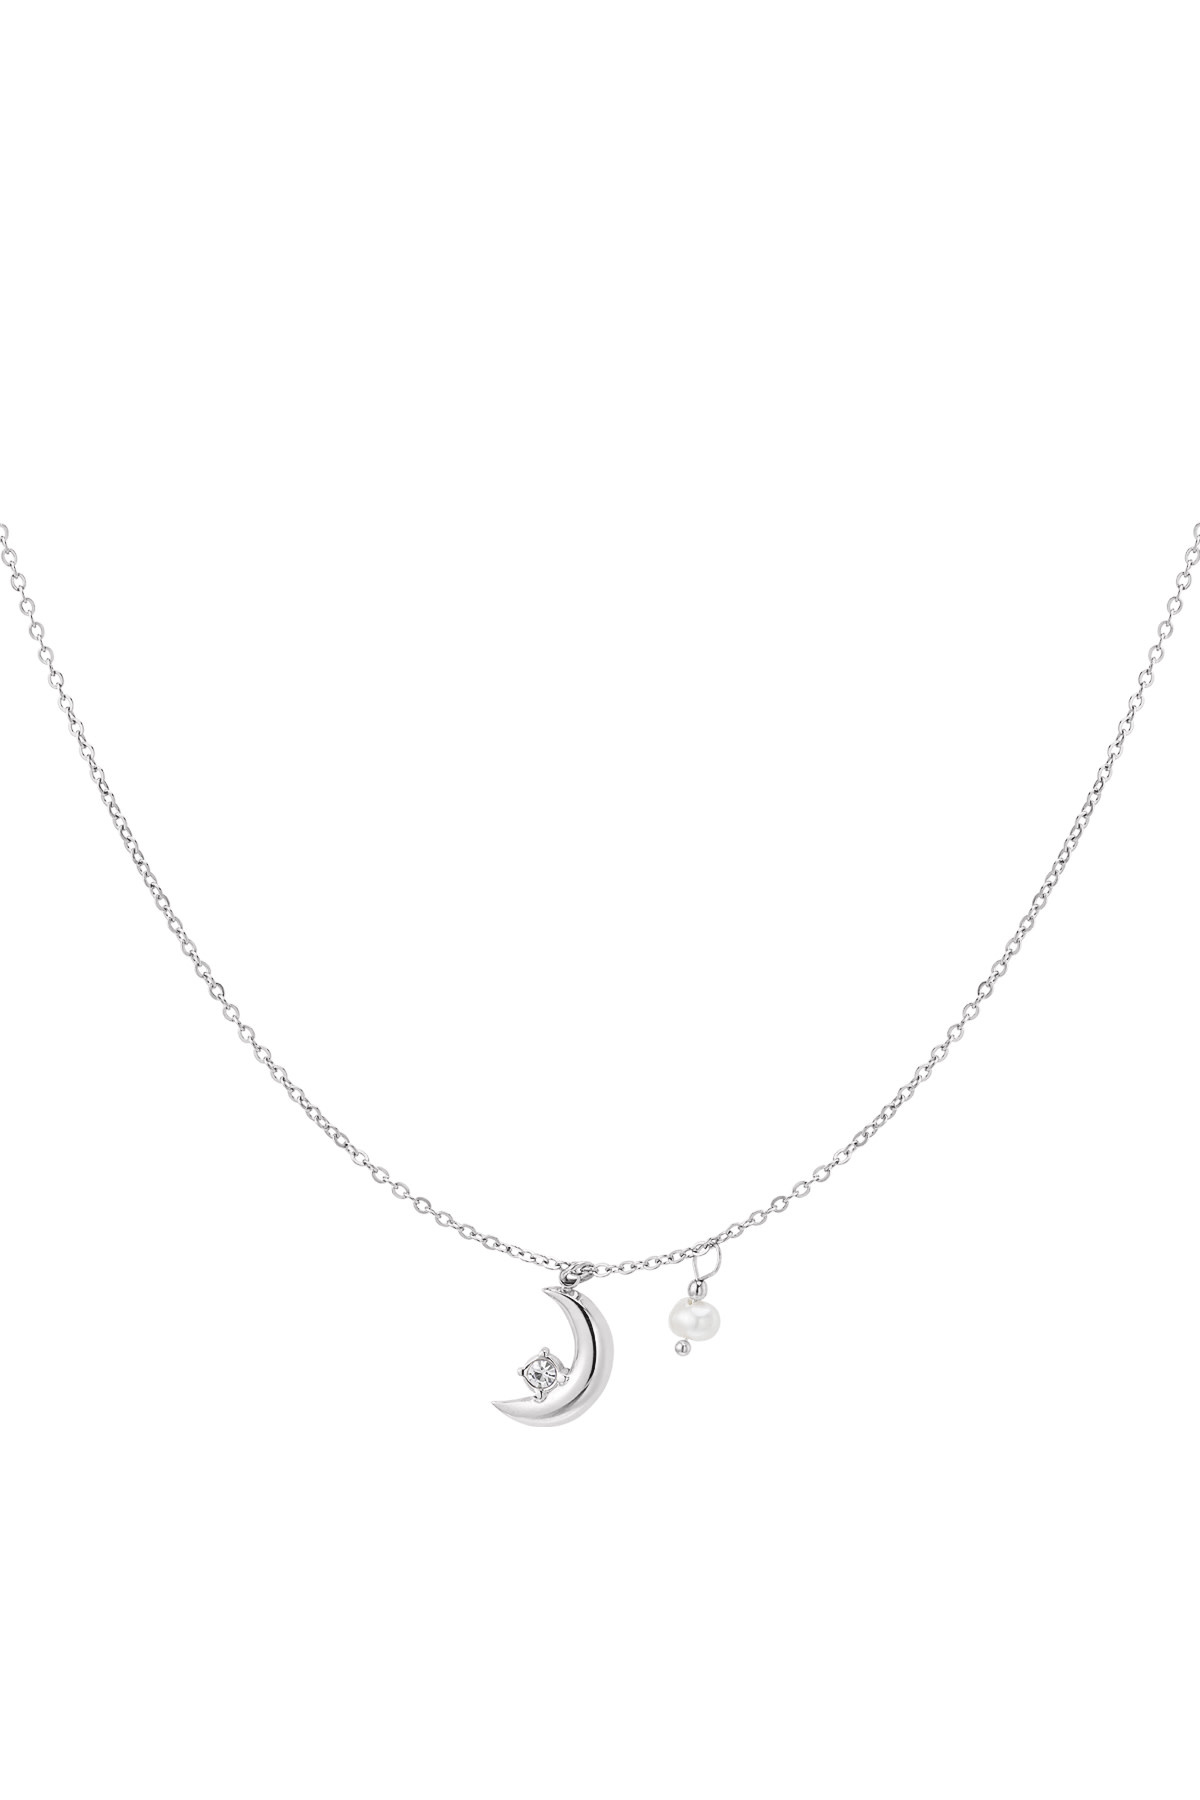 With love Necklace  silver - moon